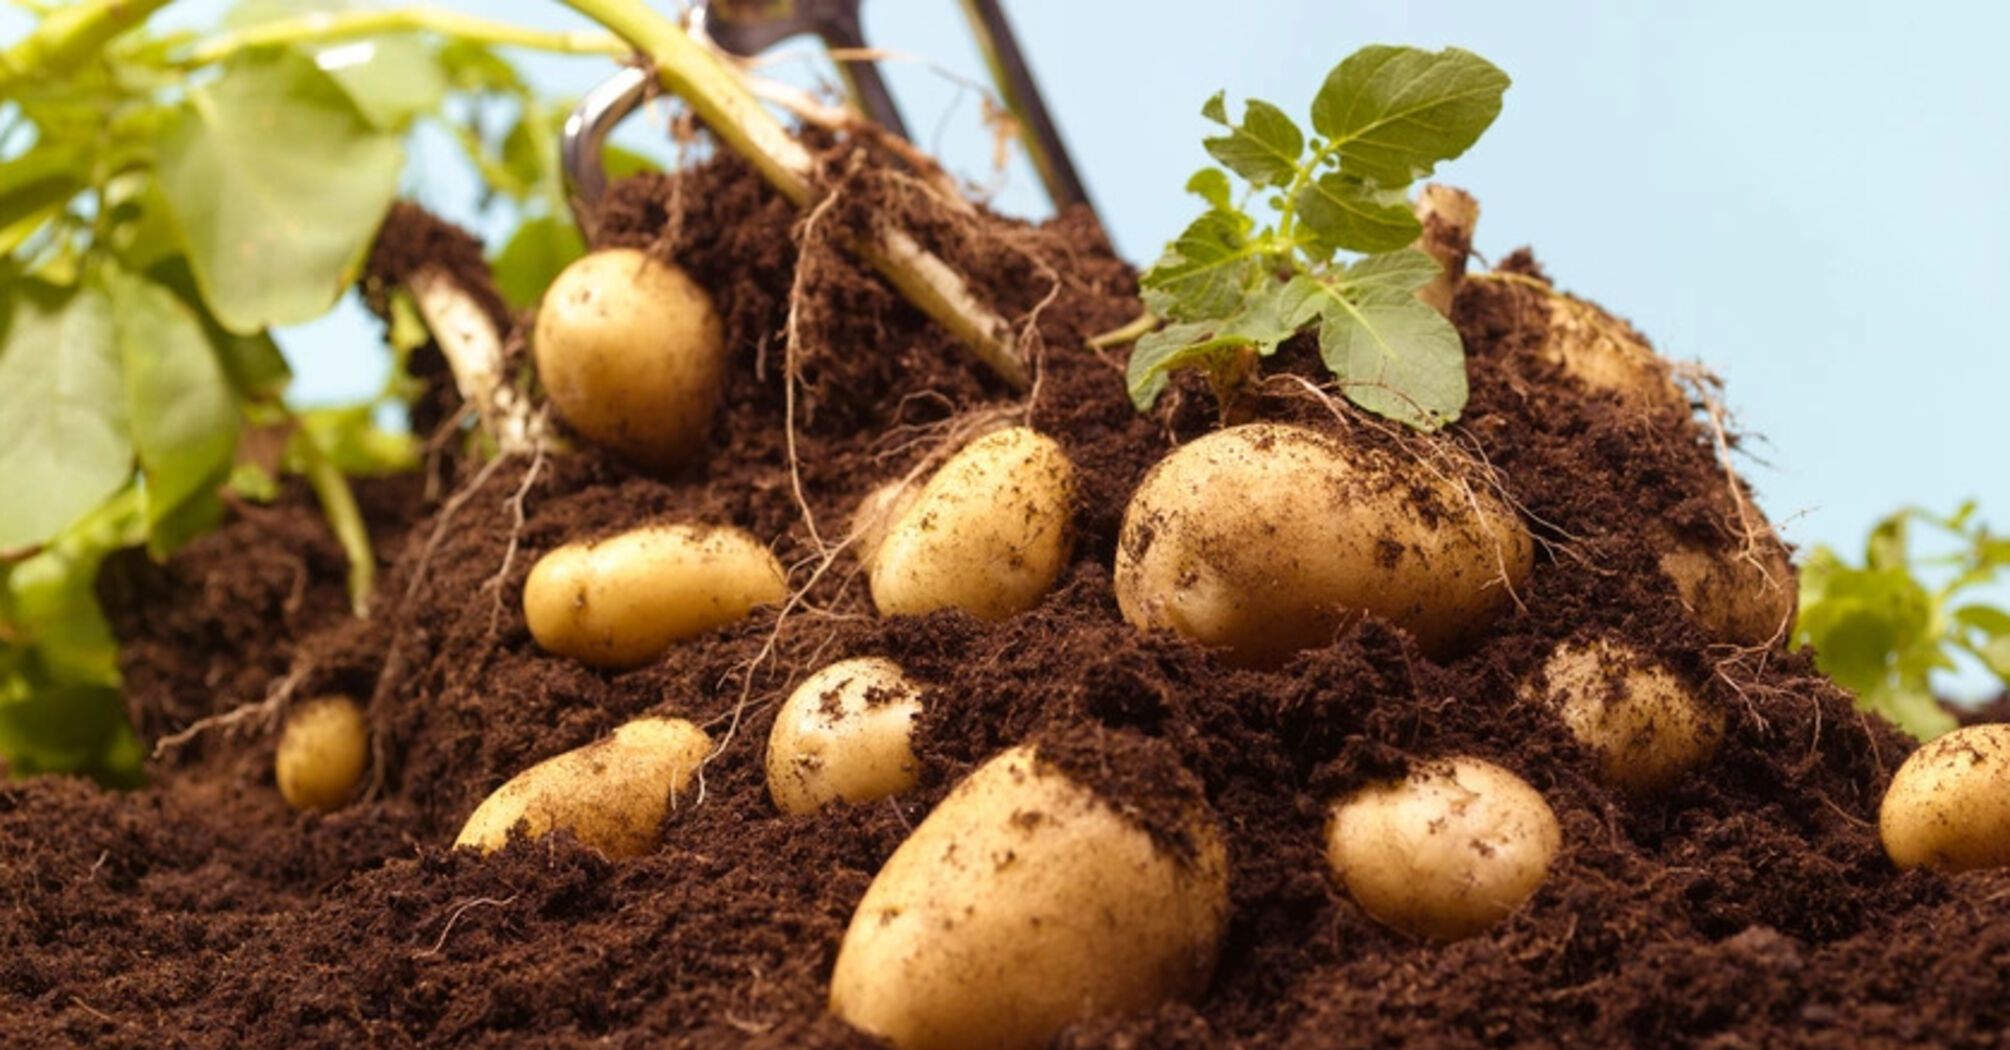 How to understand when it's time to plant potatoes